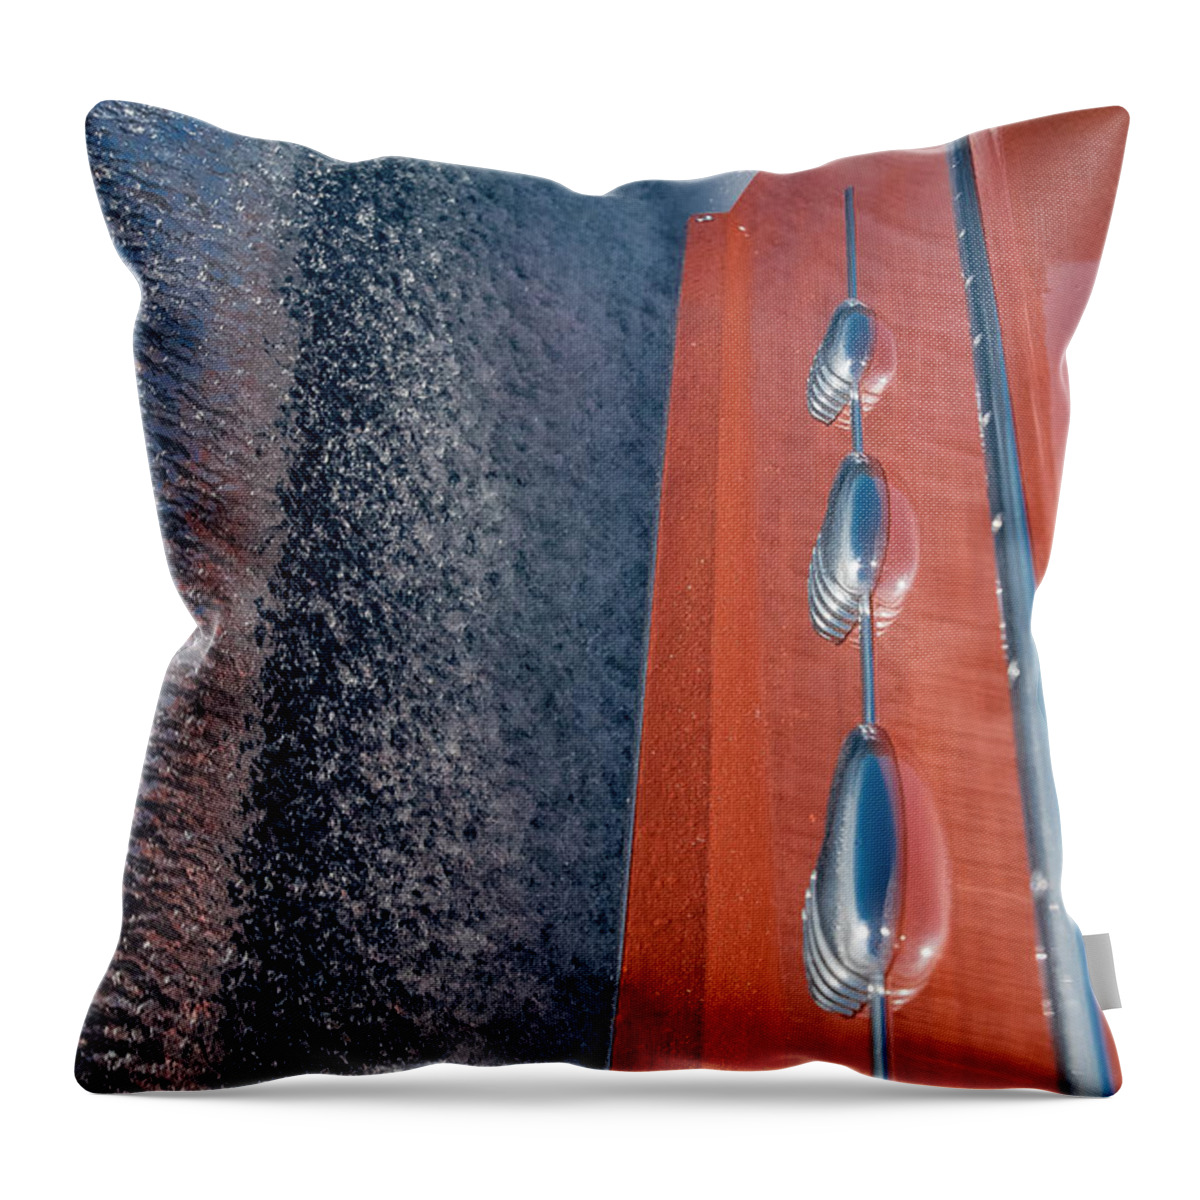 Wooden Boat Throw Pillow featuring the photograph Riva Spray by Steven Lapkin